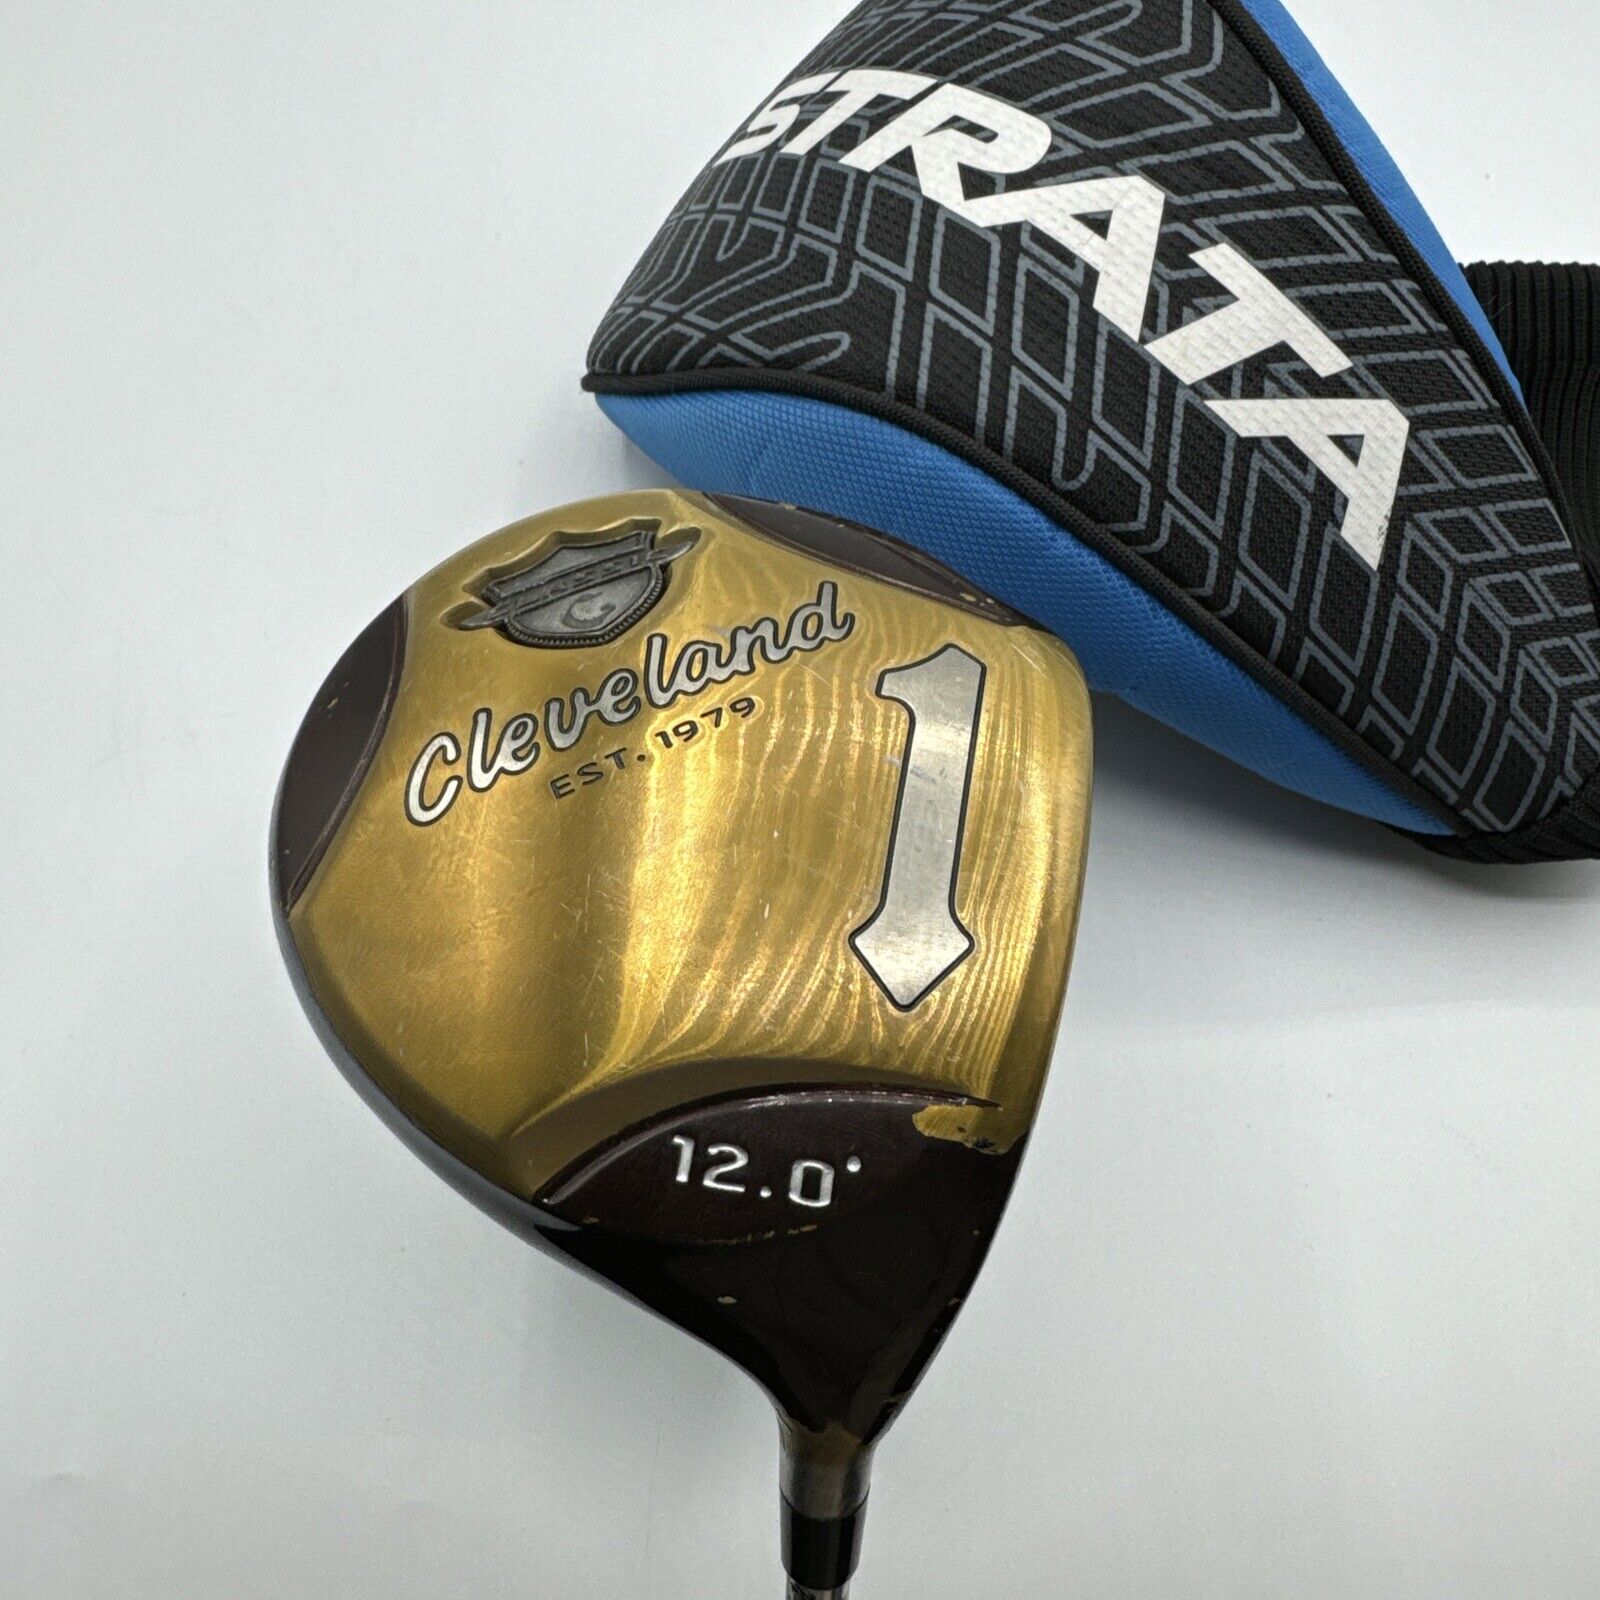 Cleveland Classic 270 Driver: Right-Handed, Miyazaki C. Kua 39A Graphite, 12.0°